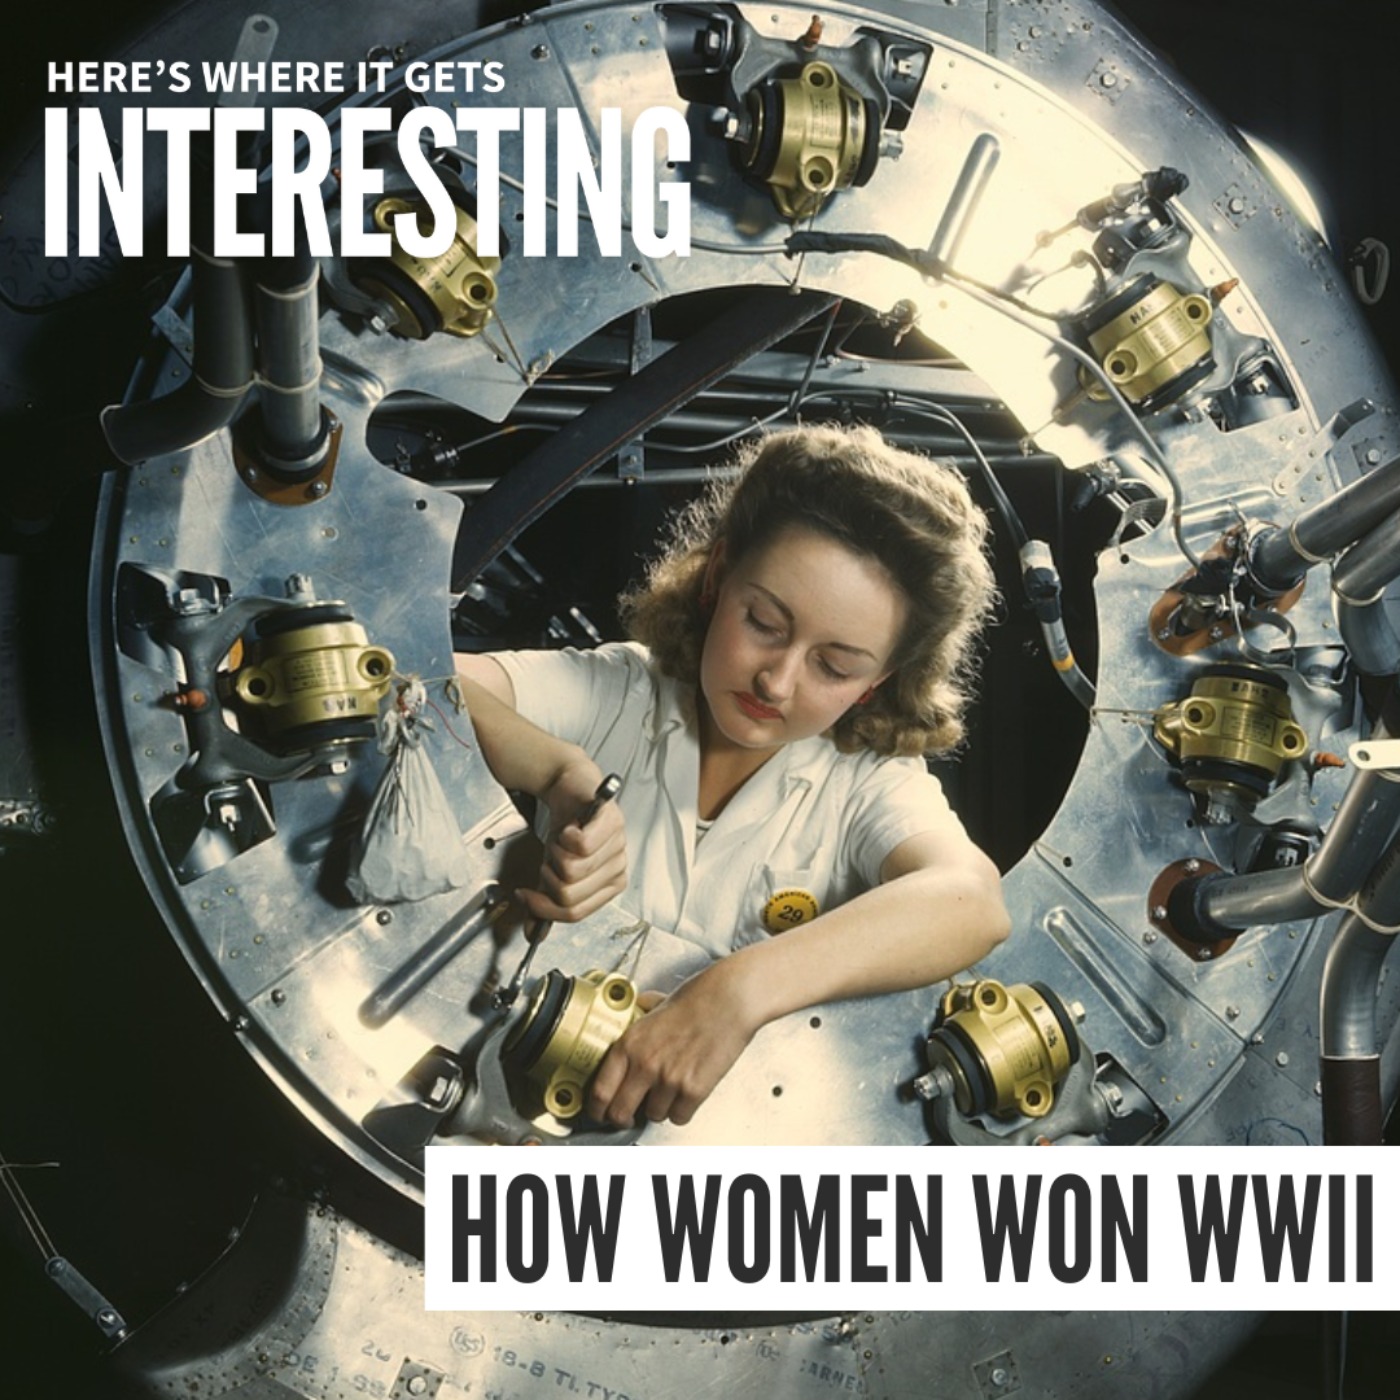 How Women Won WWII: With a Flash and a Rumble